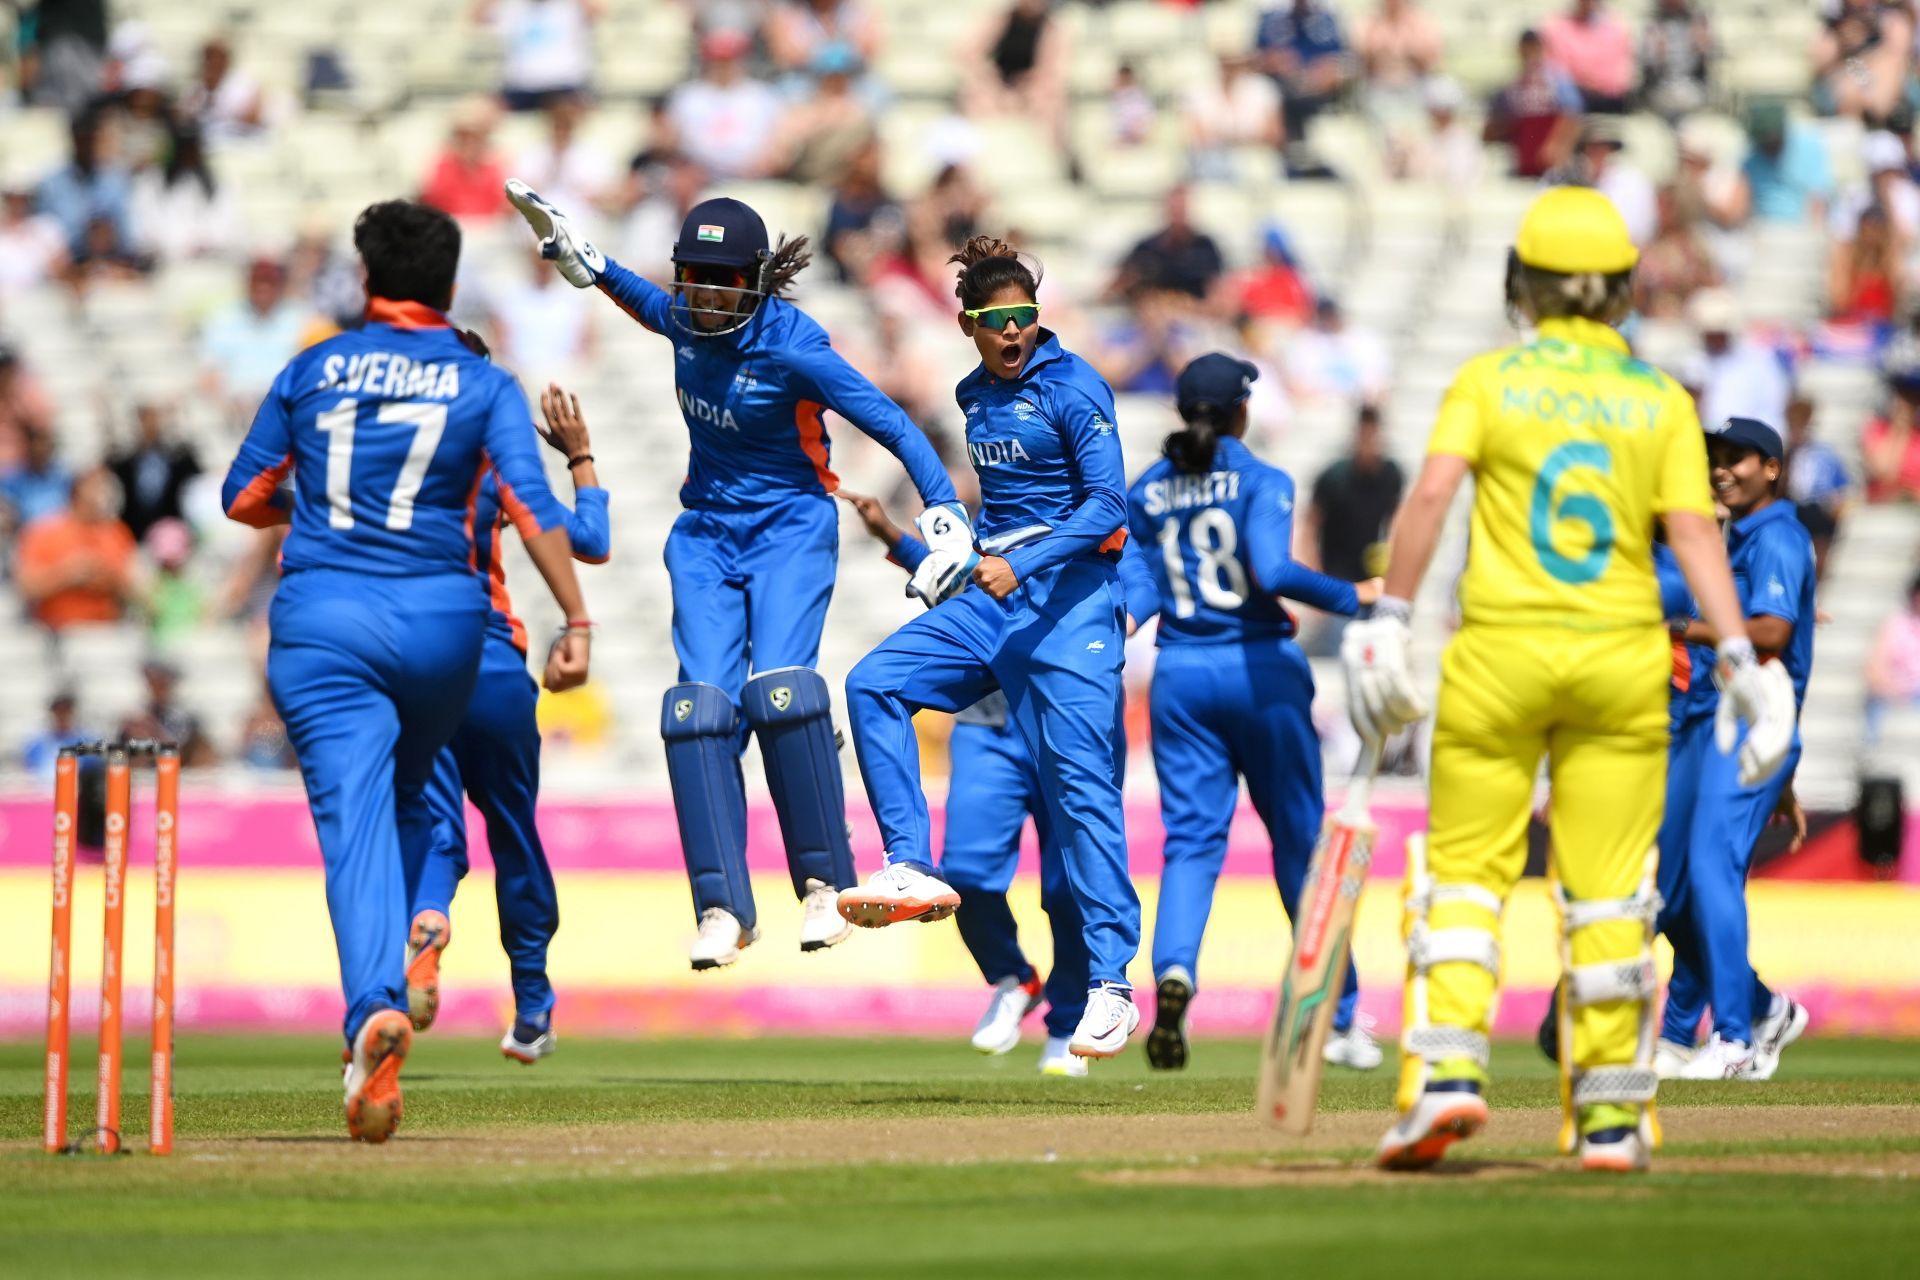 This Indian fielding unit leaves a lot to be desired. Pic: Getty Images